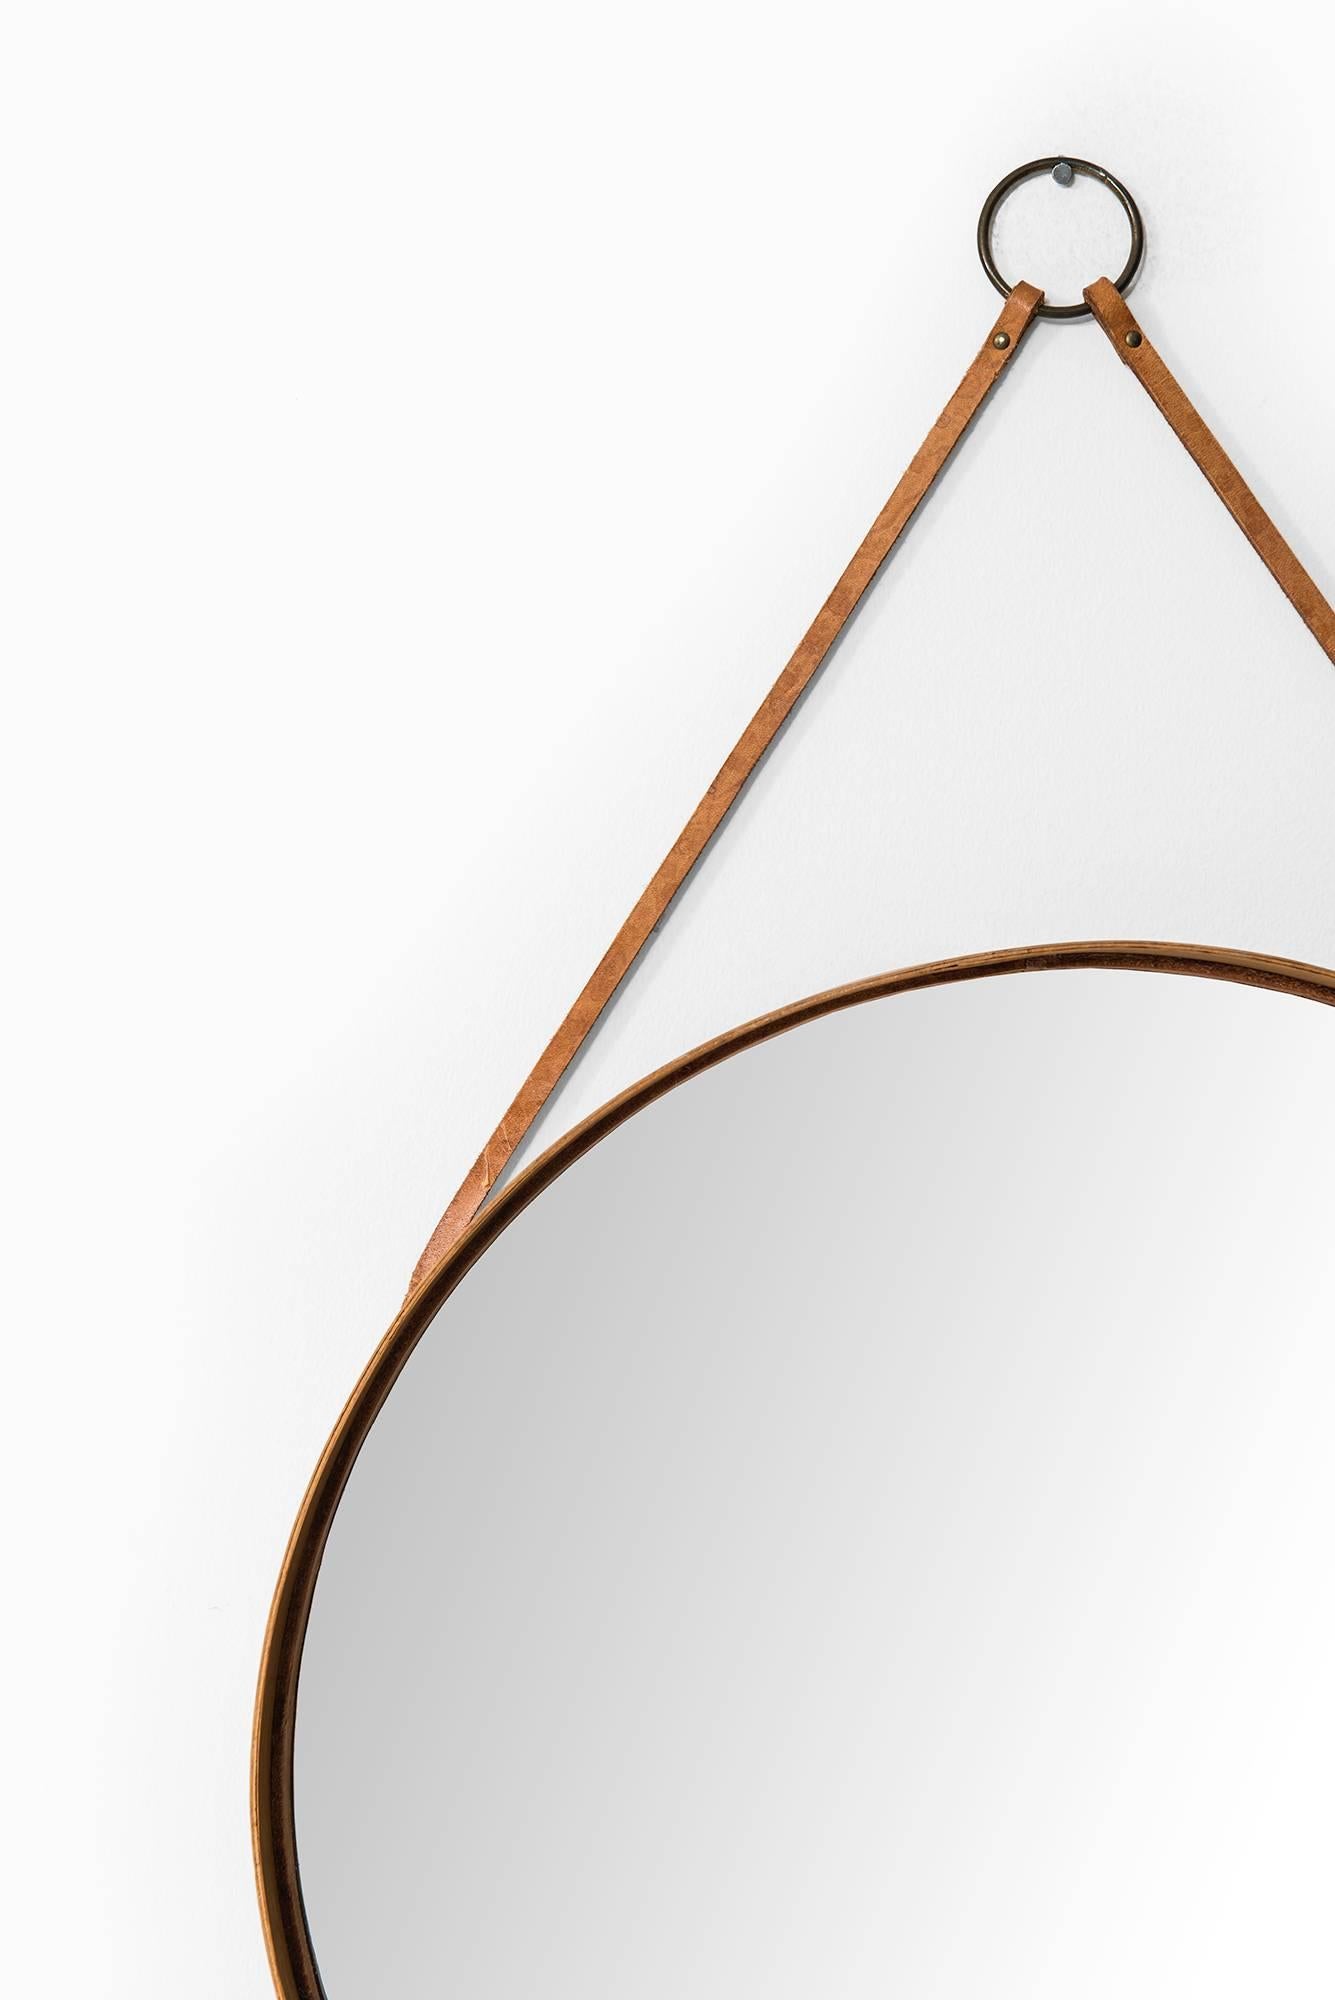 Rare mirror in oak, brass and leather. Produced by Glas Mäster in Markaryd, Sweden.